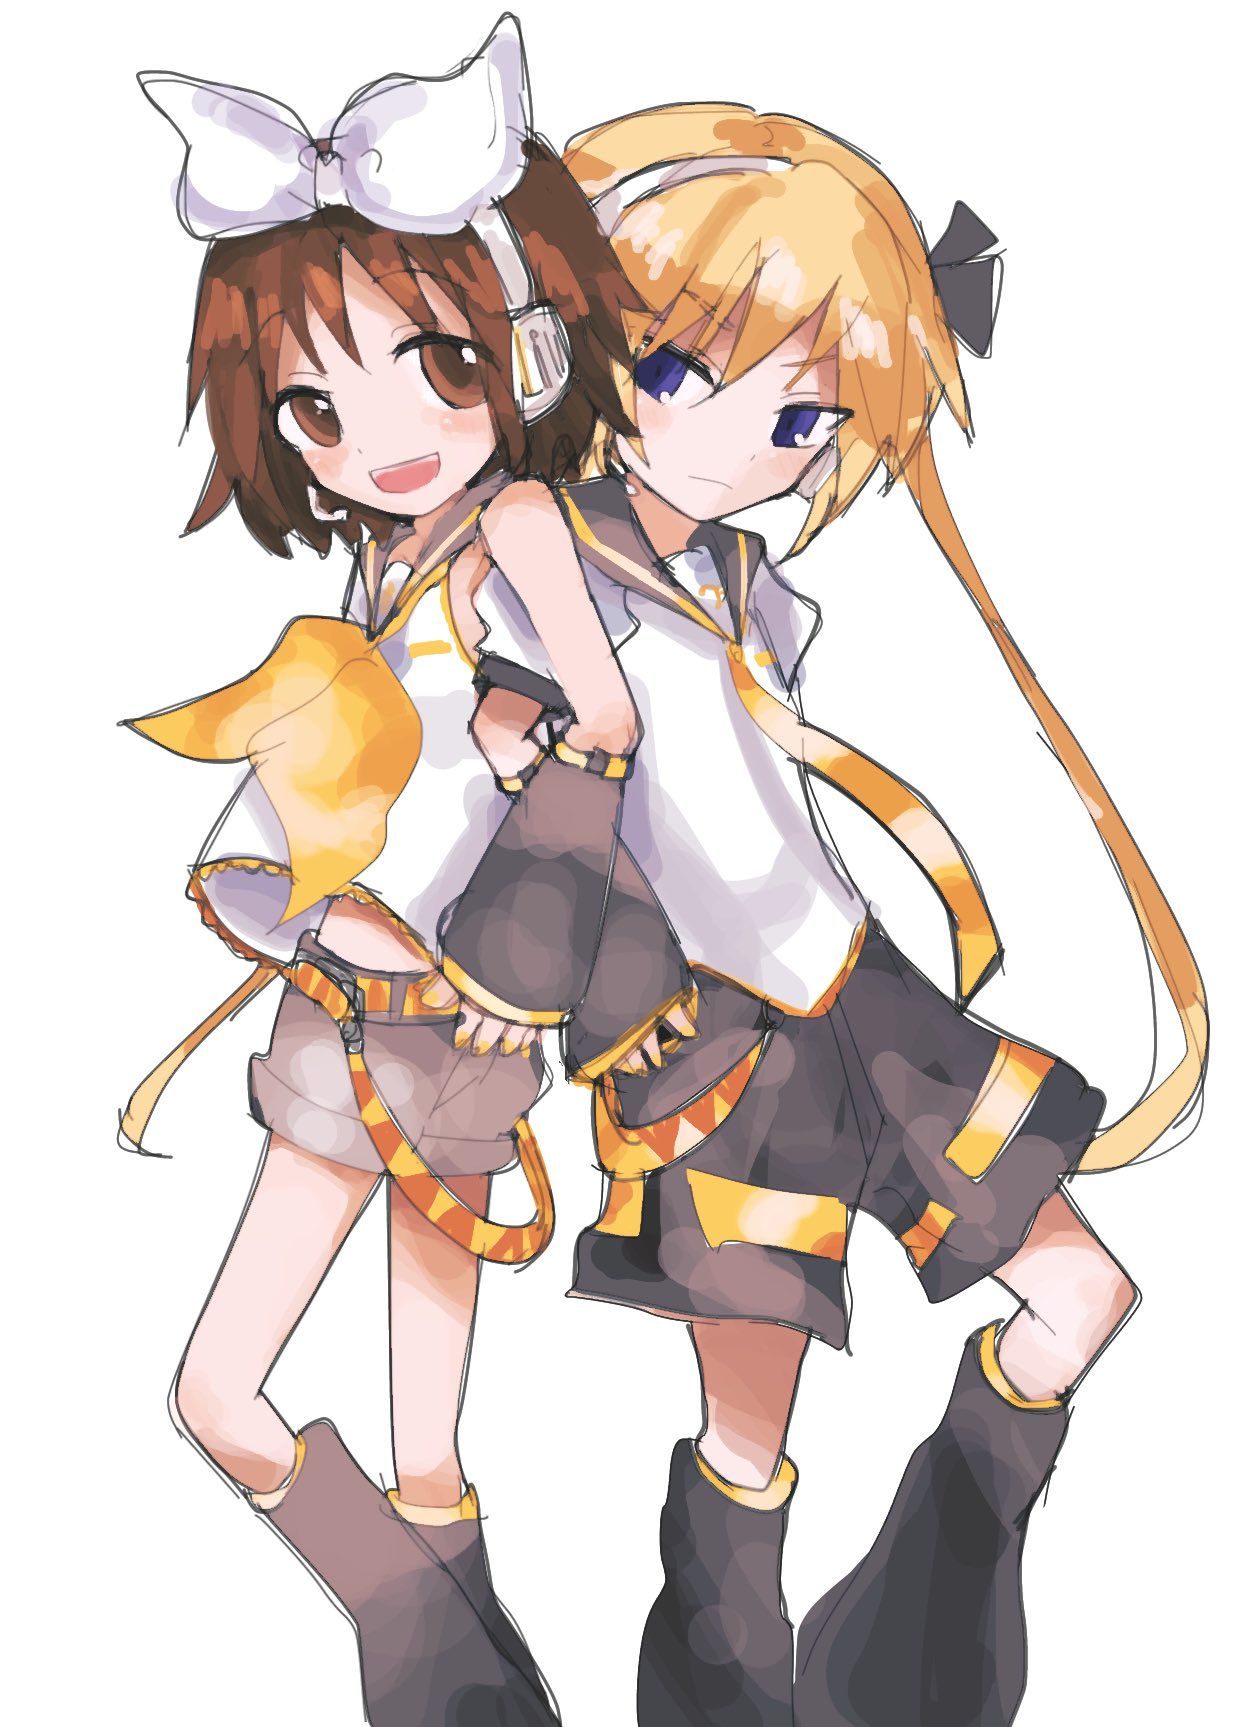 2girls arm_warmers back-to-back blonde_hair bow brown_hair cosplay detached_sleeves hair_bow headphones headset highres kagamine_len kagamine_len_(cosplay) kagamine_rin kagamine_rin_(cosplay) kill_me_baby leg_warmers locked_arms long_hair midriff midriff_peek multiple_girls neckerchief necktie open_mouth oribe_yasuna sailor_collar short_hair shorts sonya_(kill_me_baby) twintails violet_eyes vocaloid white_background white_bow yellow_neckwear